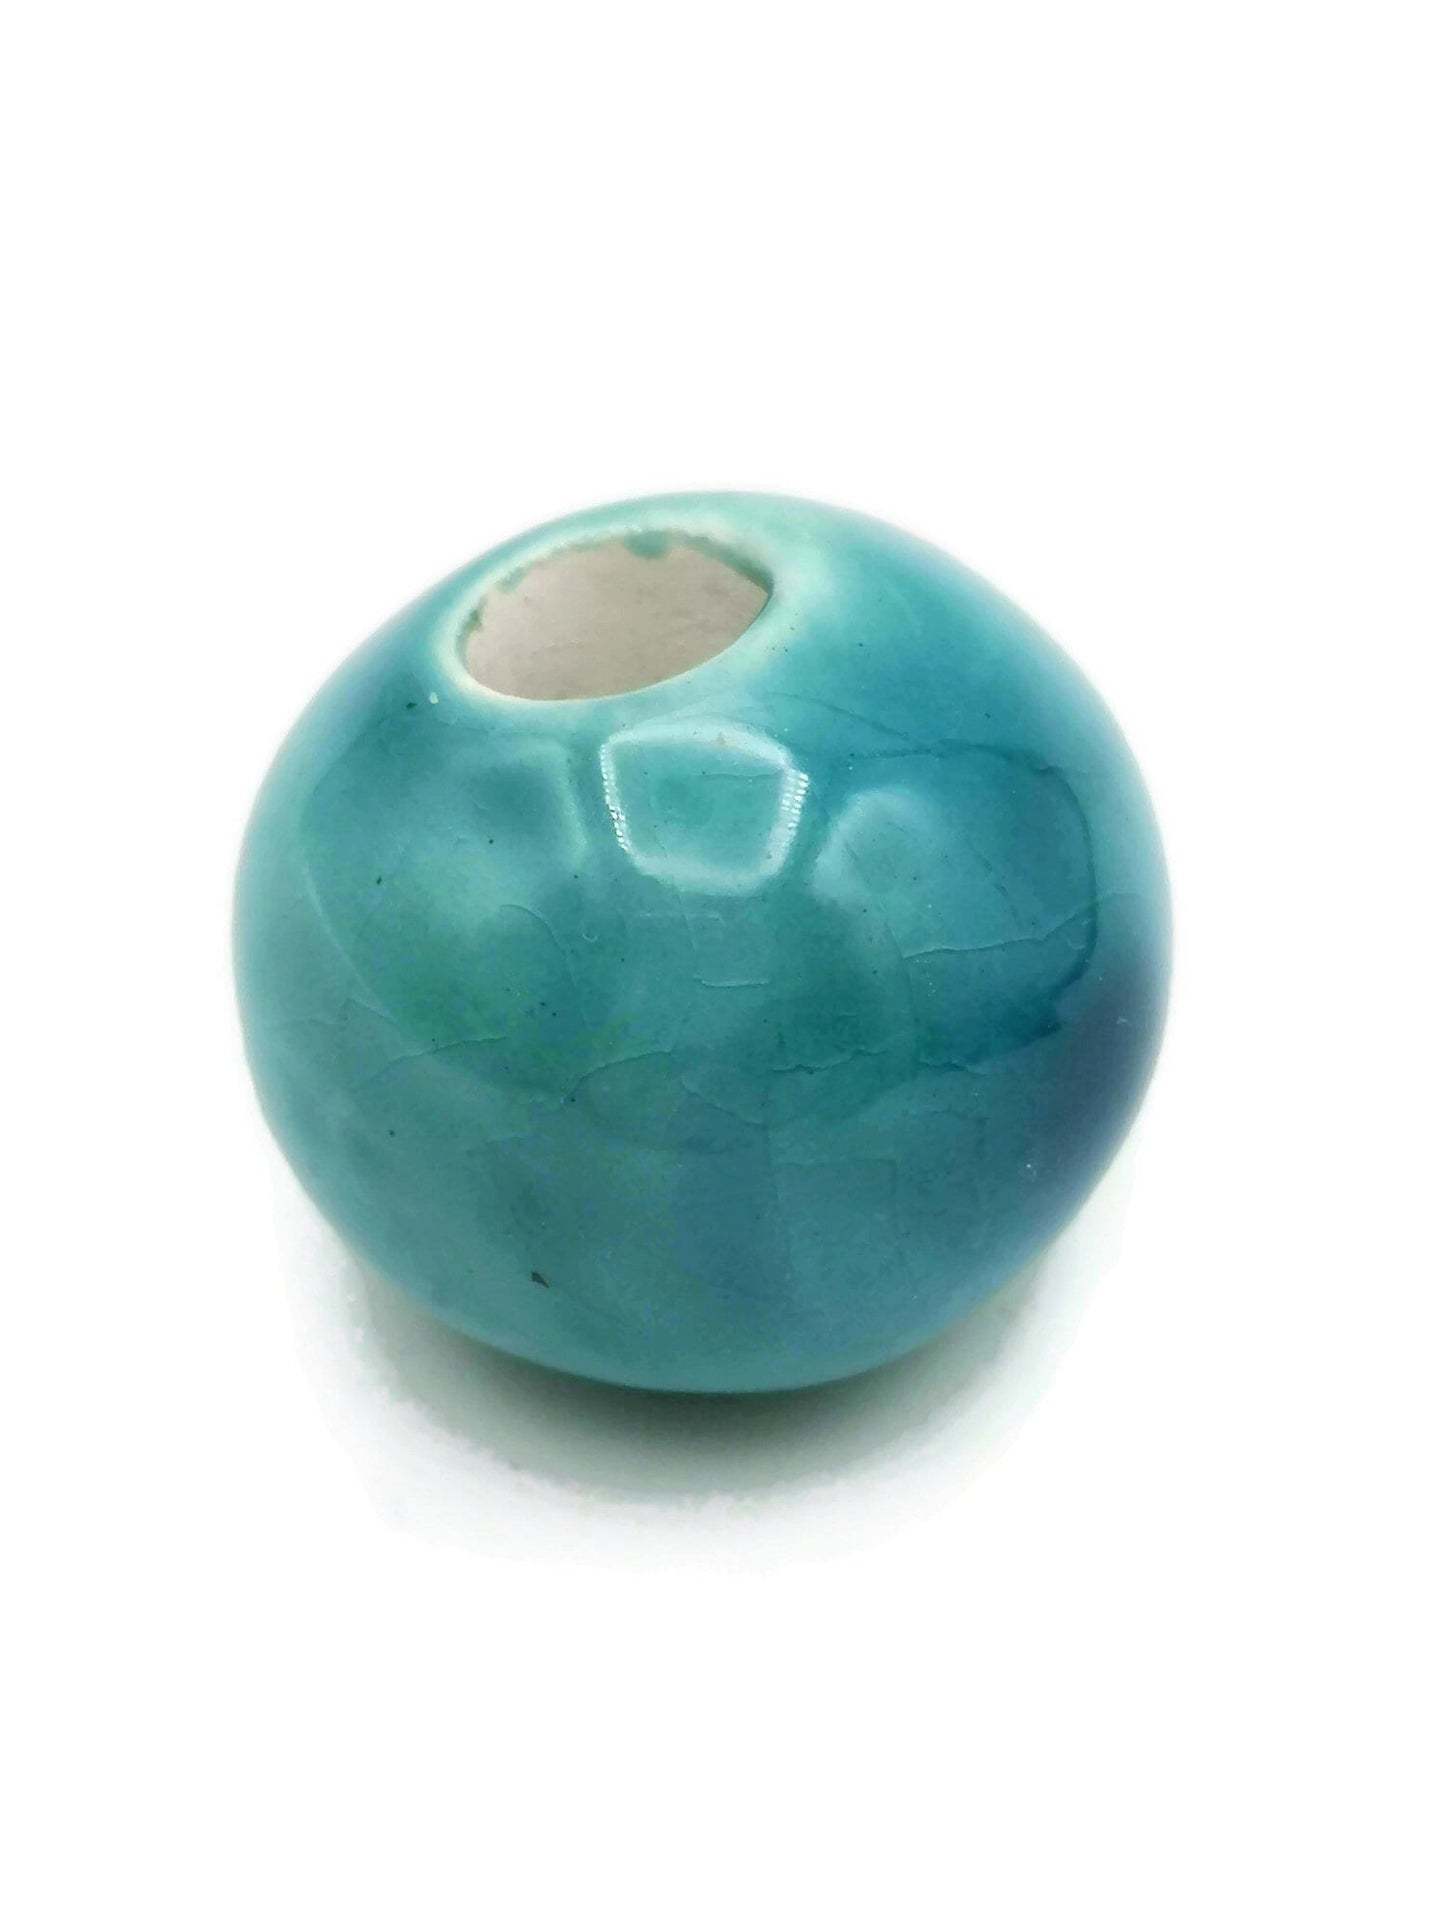 1Pc Oriental Blue Artisan Ceramic Macrame Beads Large Hole, Handmade Unique Clay Beads For Jewelry Making Supplies, Focal Point Beads - Ceramica Ana Rafael